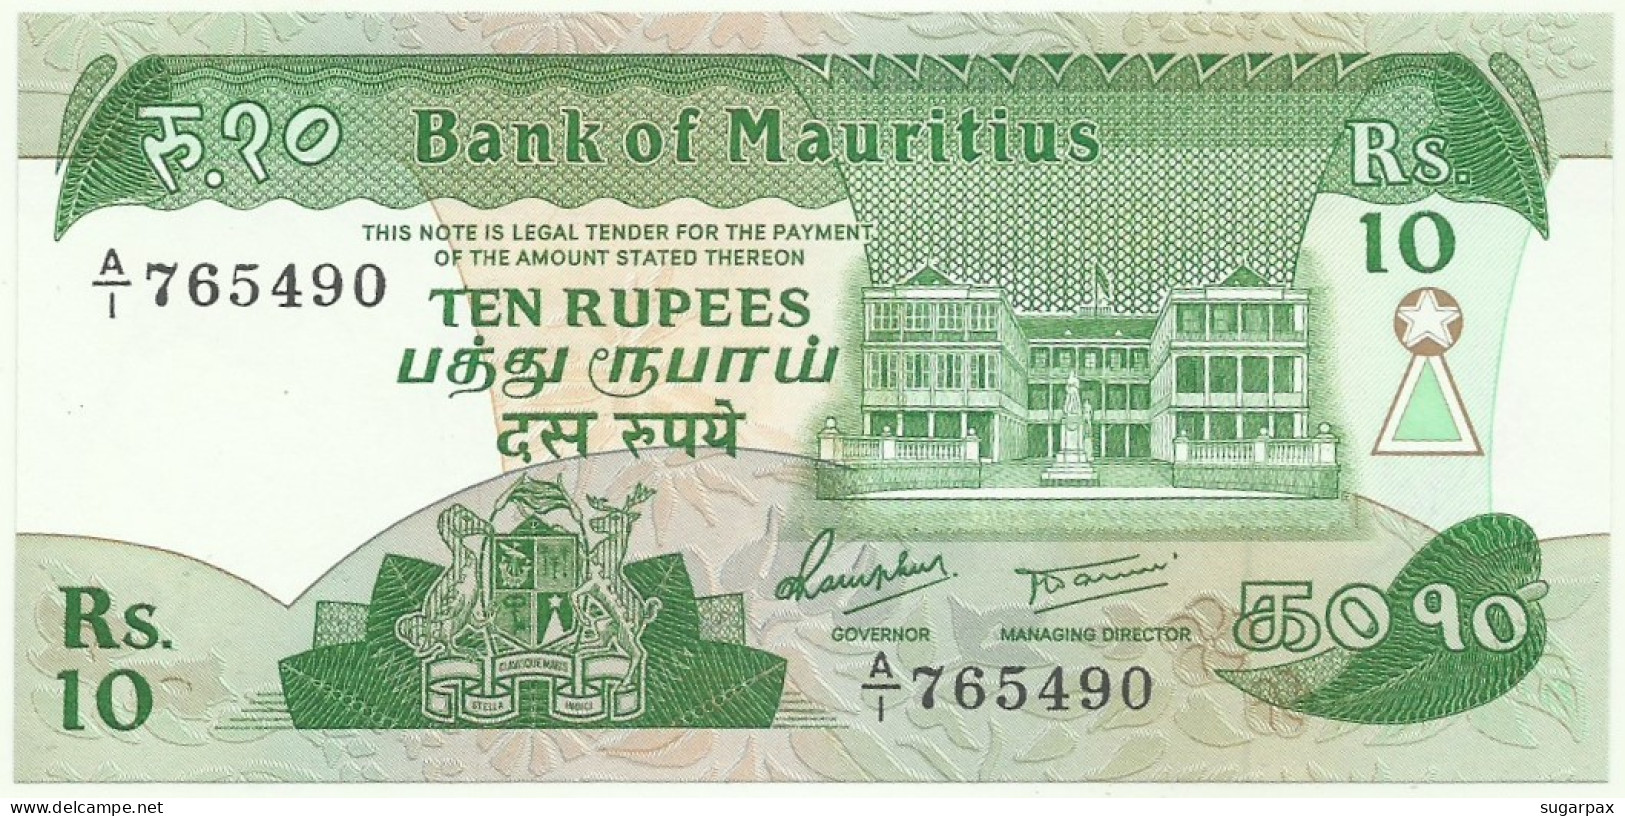 MAURITIUS - 10 RUPEES - ND ( 1985 ) - Pick 35.a - Unc. - Sign. 5 - Serie A/1 - Maurice